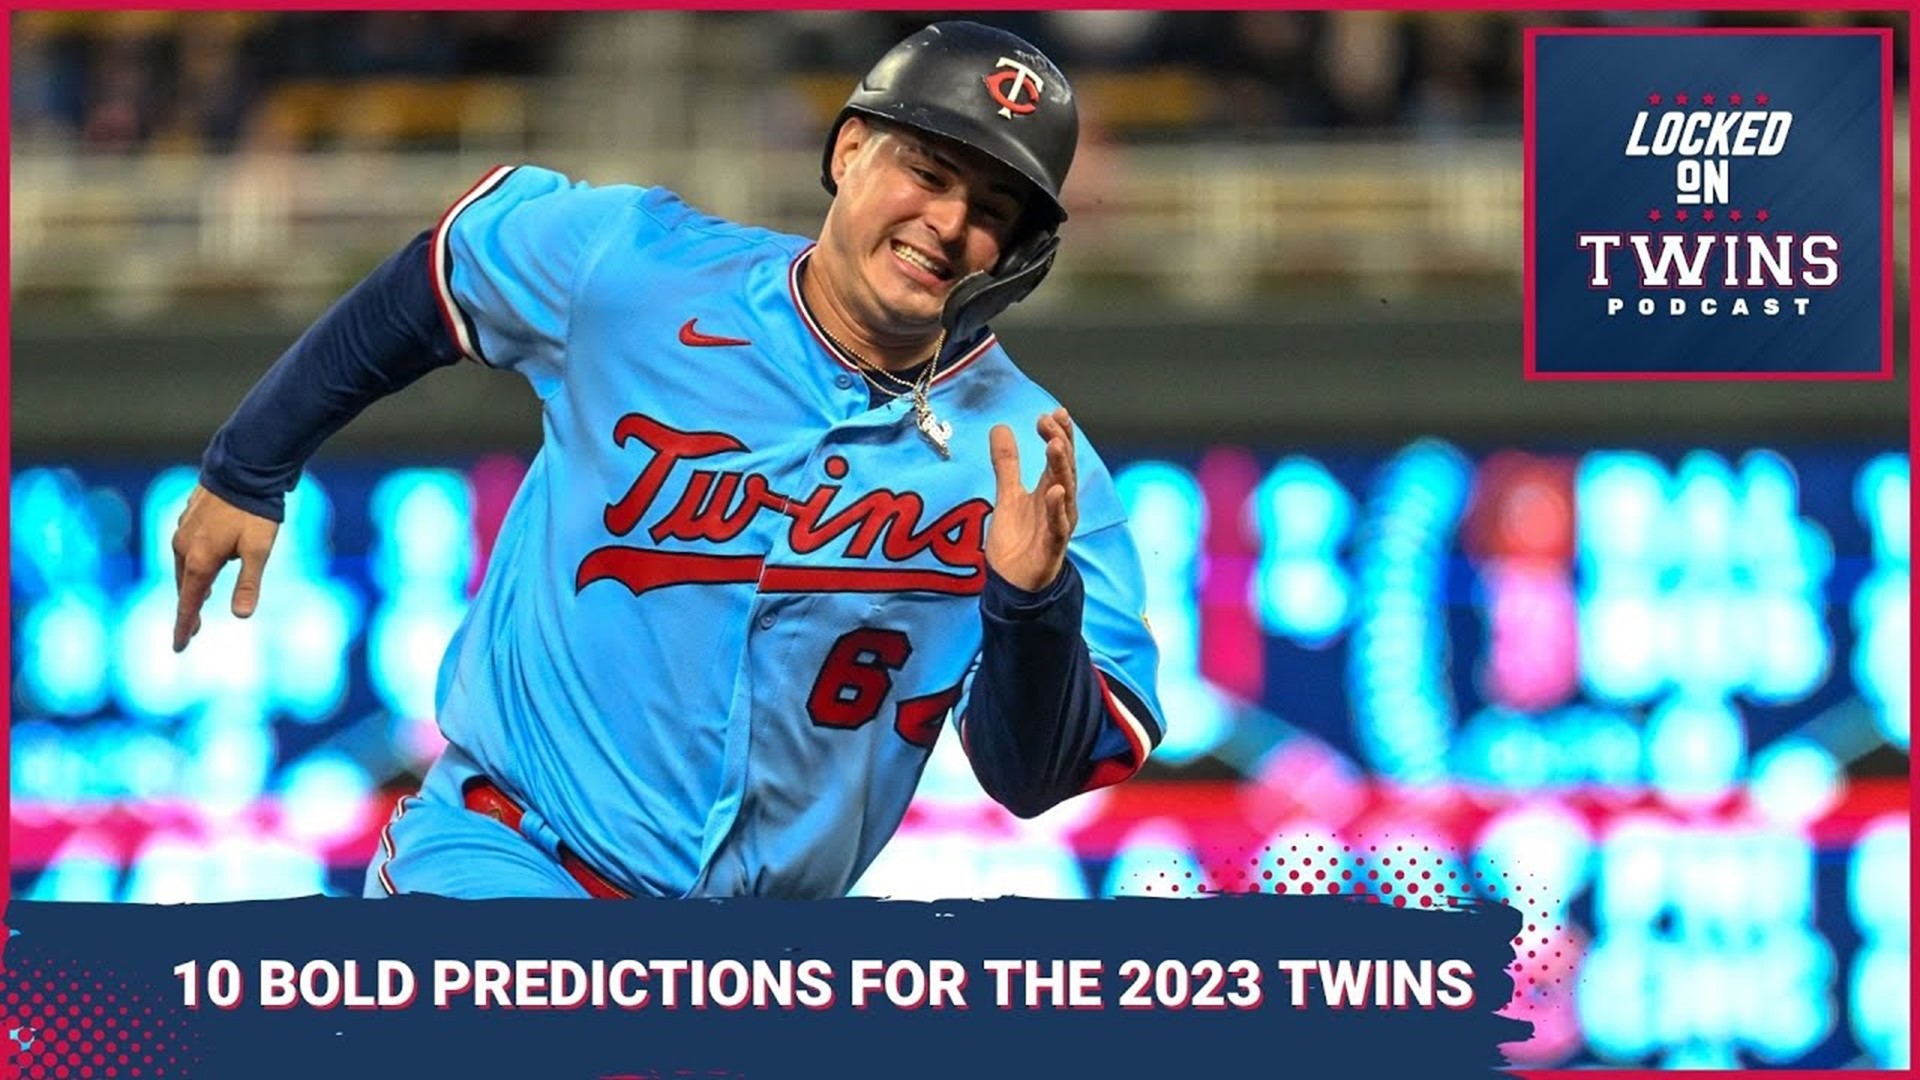 Here are Brandon Warne's 10 bold predictions about the 2023 Minnesota Twins. They may not be beautiful, but they're definitely bold! Do you agree? Disagree?